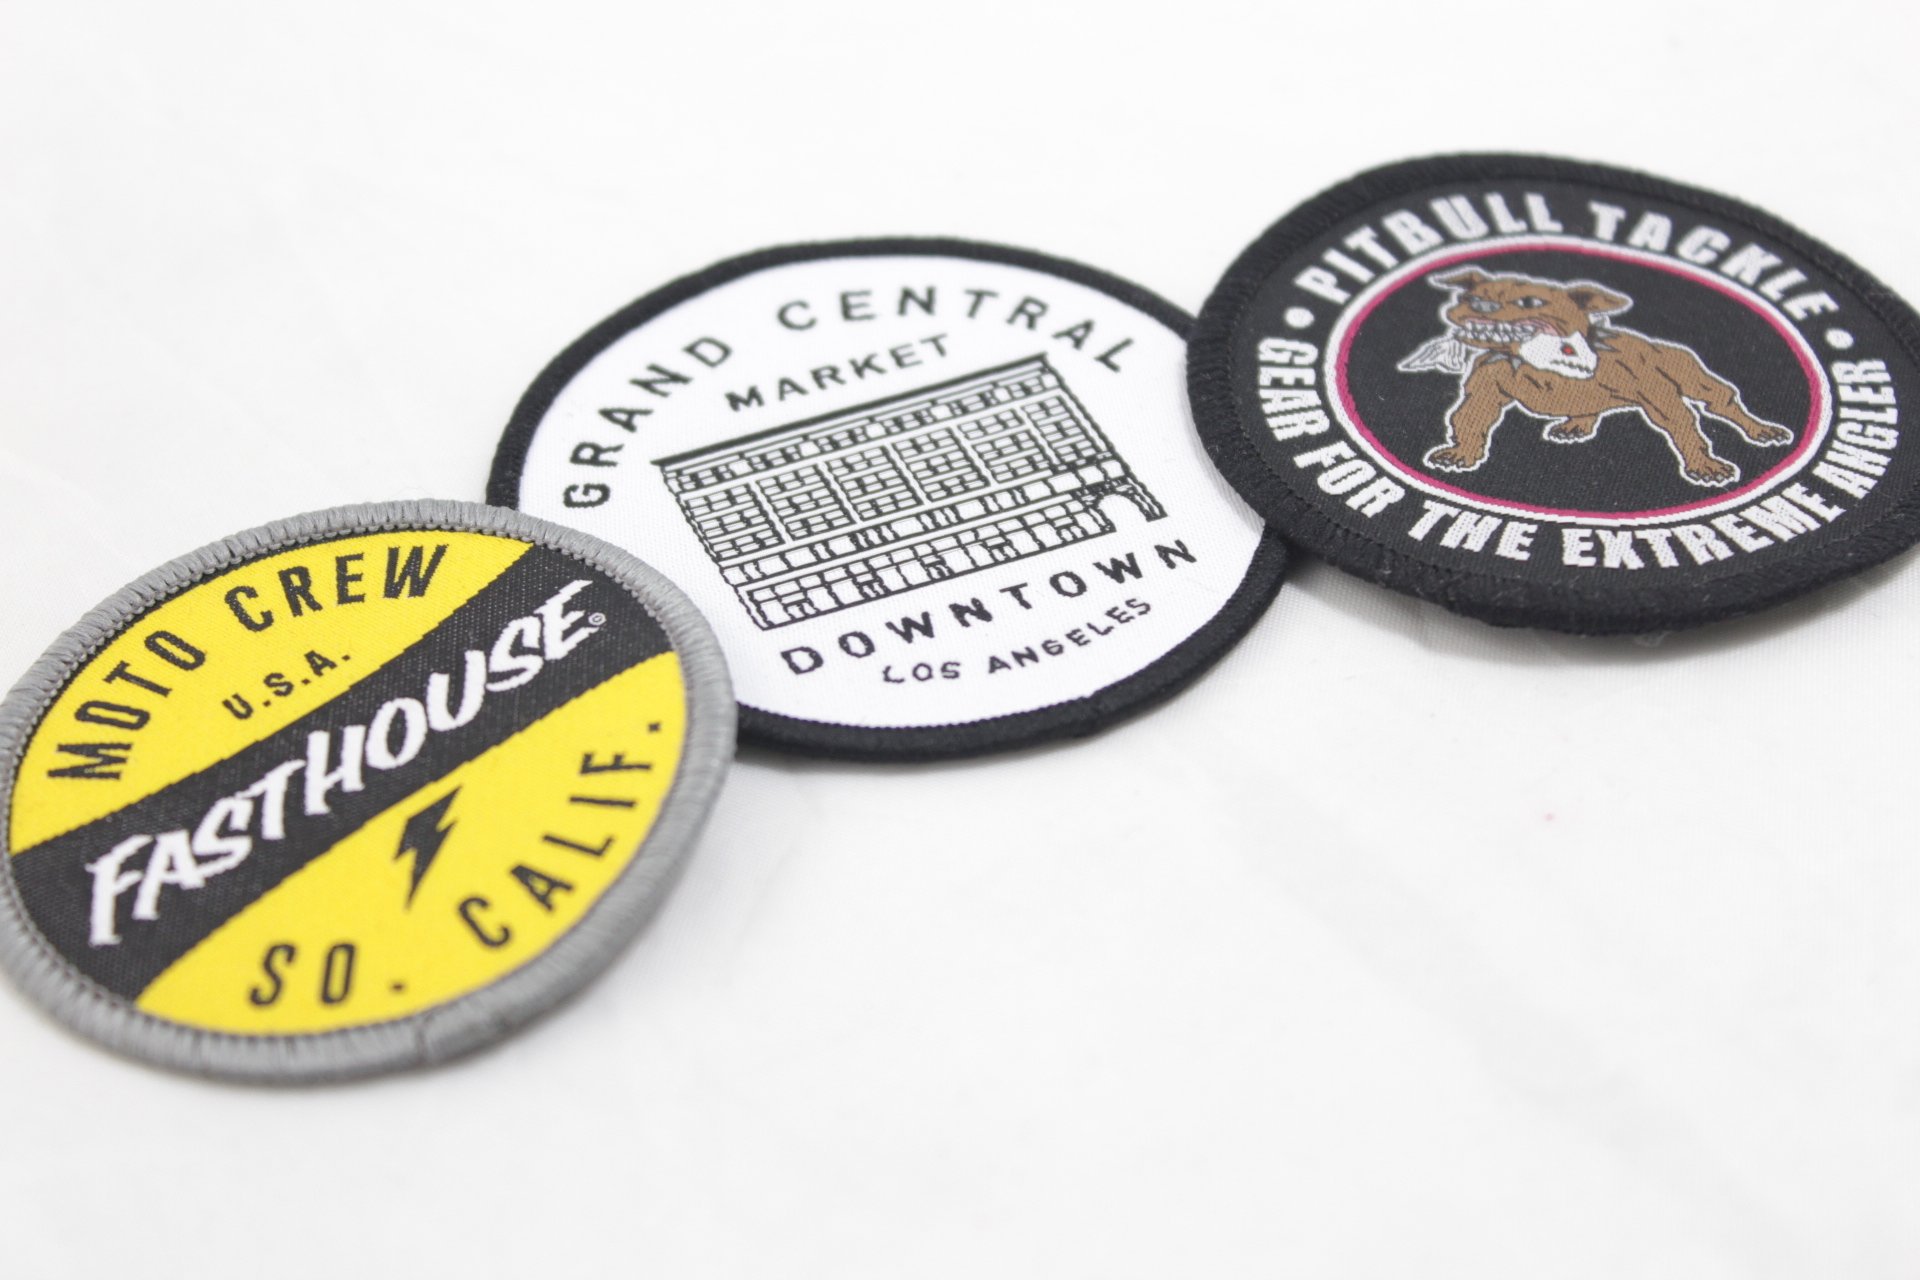 grand central market white circle patch